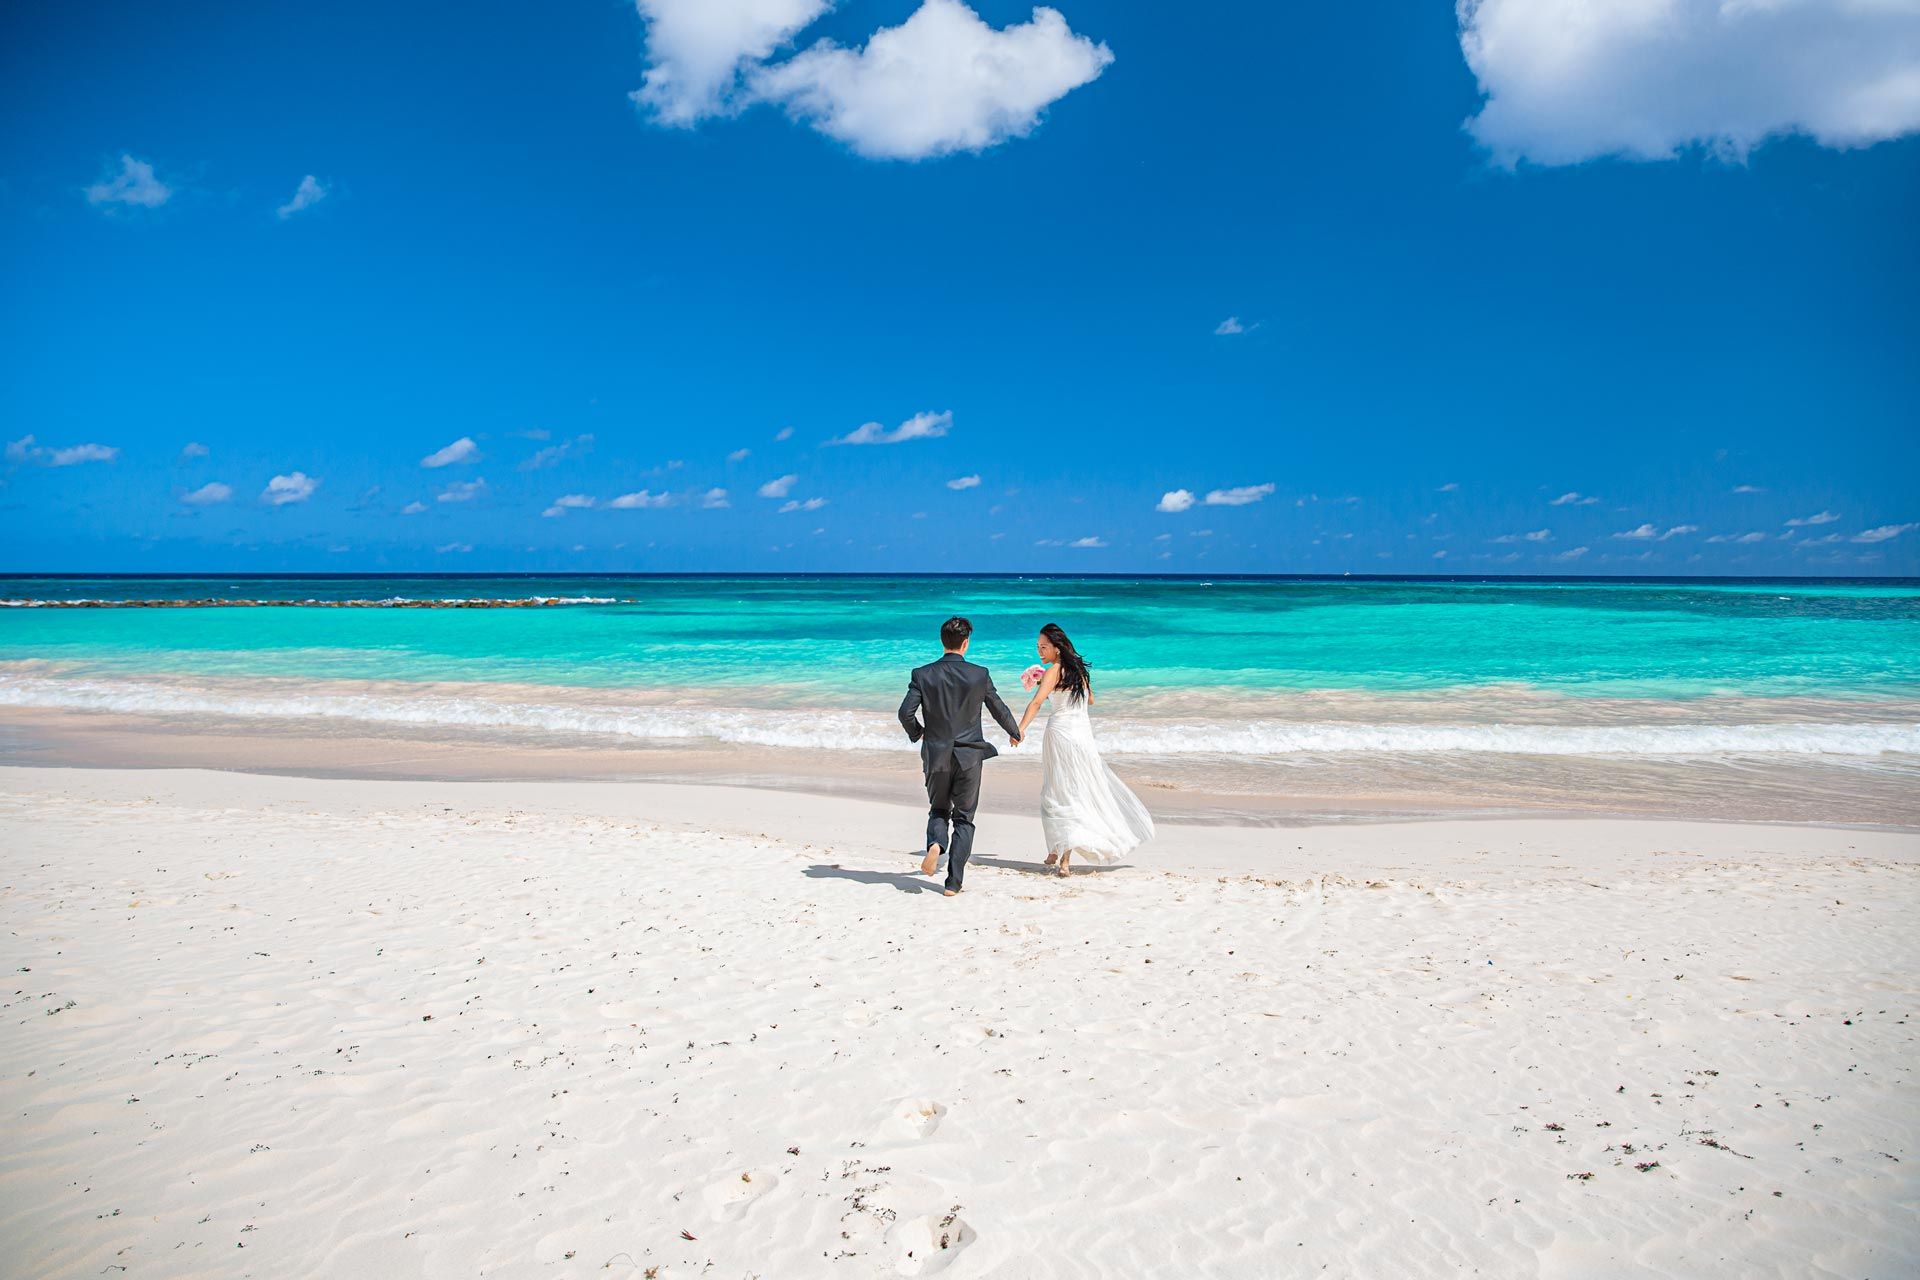 Seven Destination Wedding Locations In Heaven & Documents Required